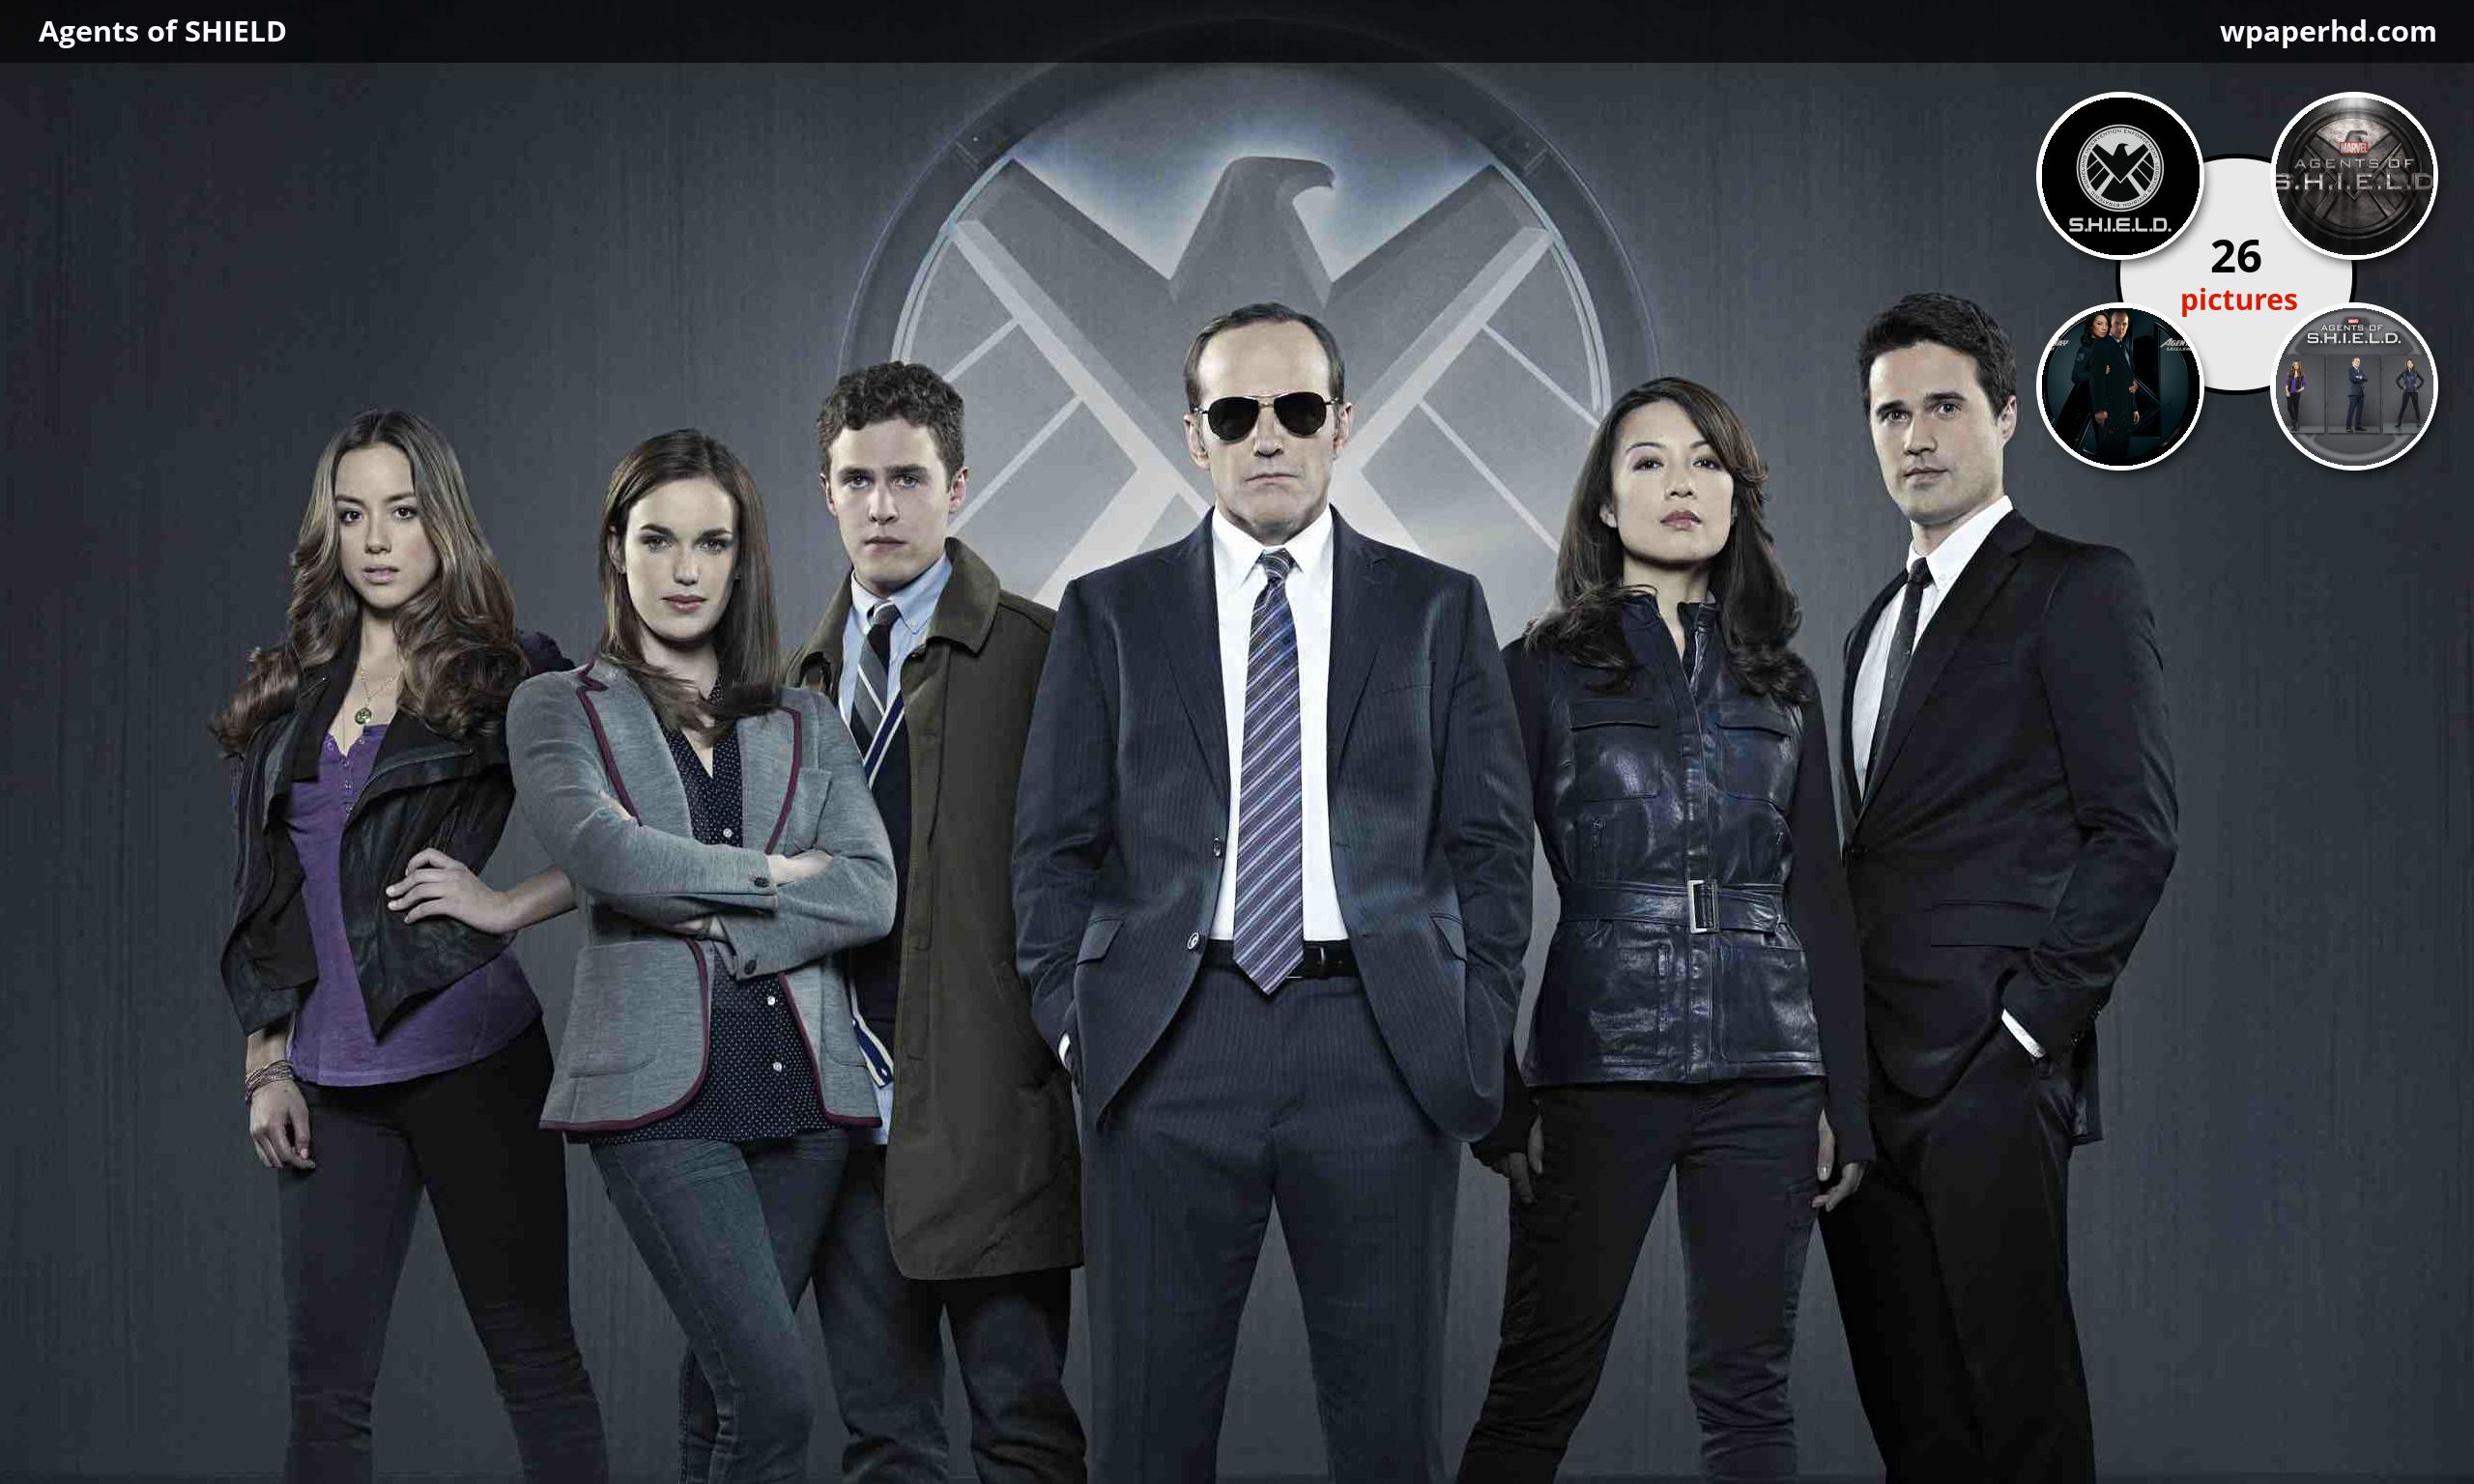 Agents - Avoca, County Wicklow , HD Wallpaper & Backgrounds